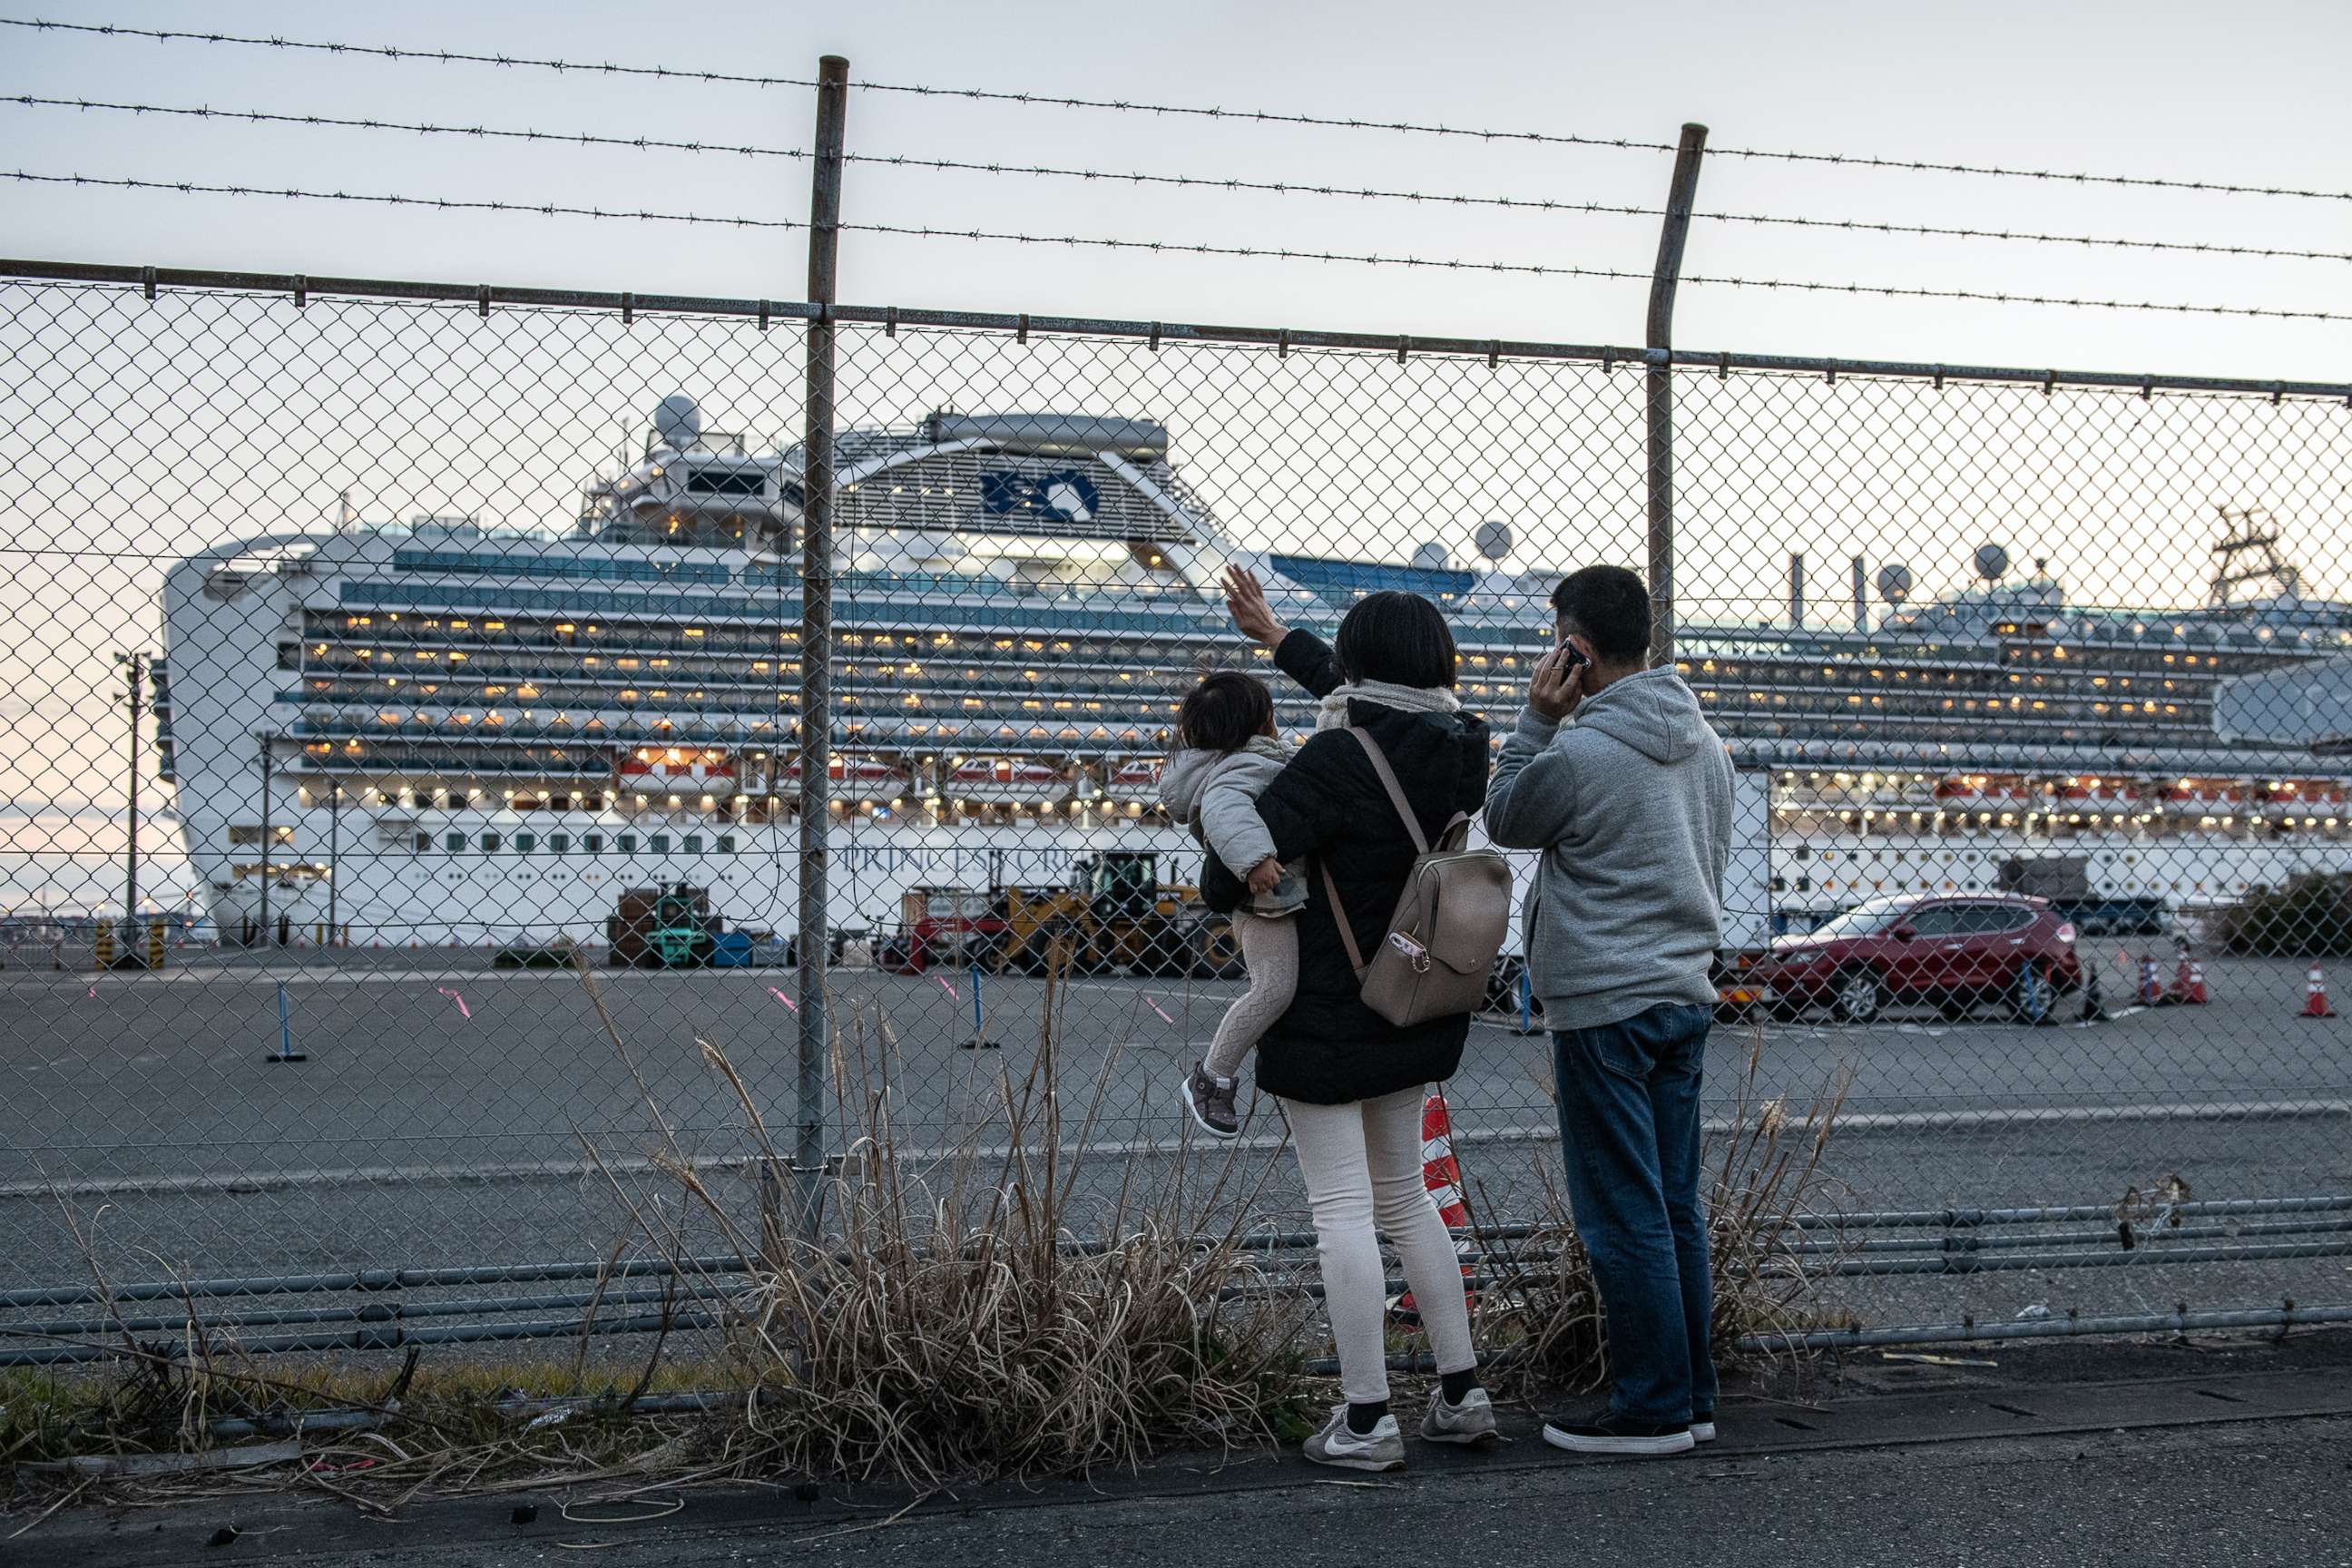 PHOTO: People wave to family on board the Diamond Princess cruise ship as it sits docked at Daikoku Pier where it is being resupplied and newly diagnosed coronavirus cases taken for treatment as it remains in quarantine, Feb. 11, 2020, in Yokohama, Japan.